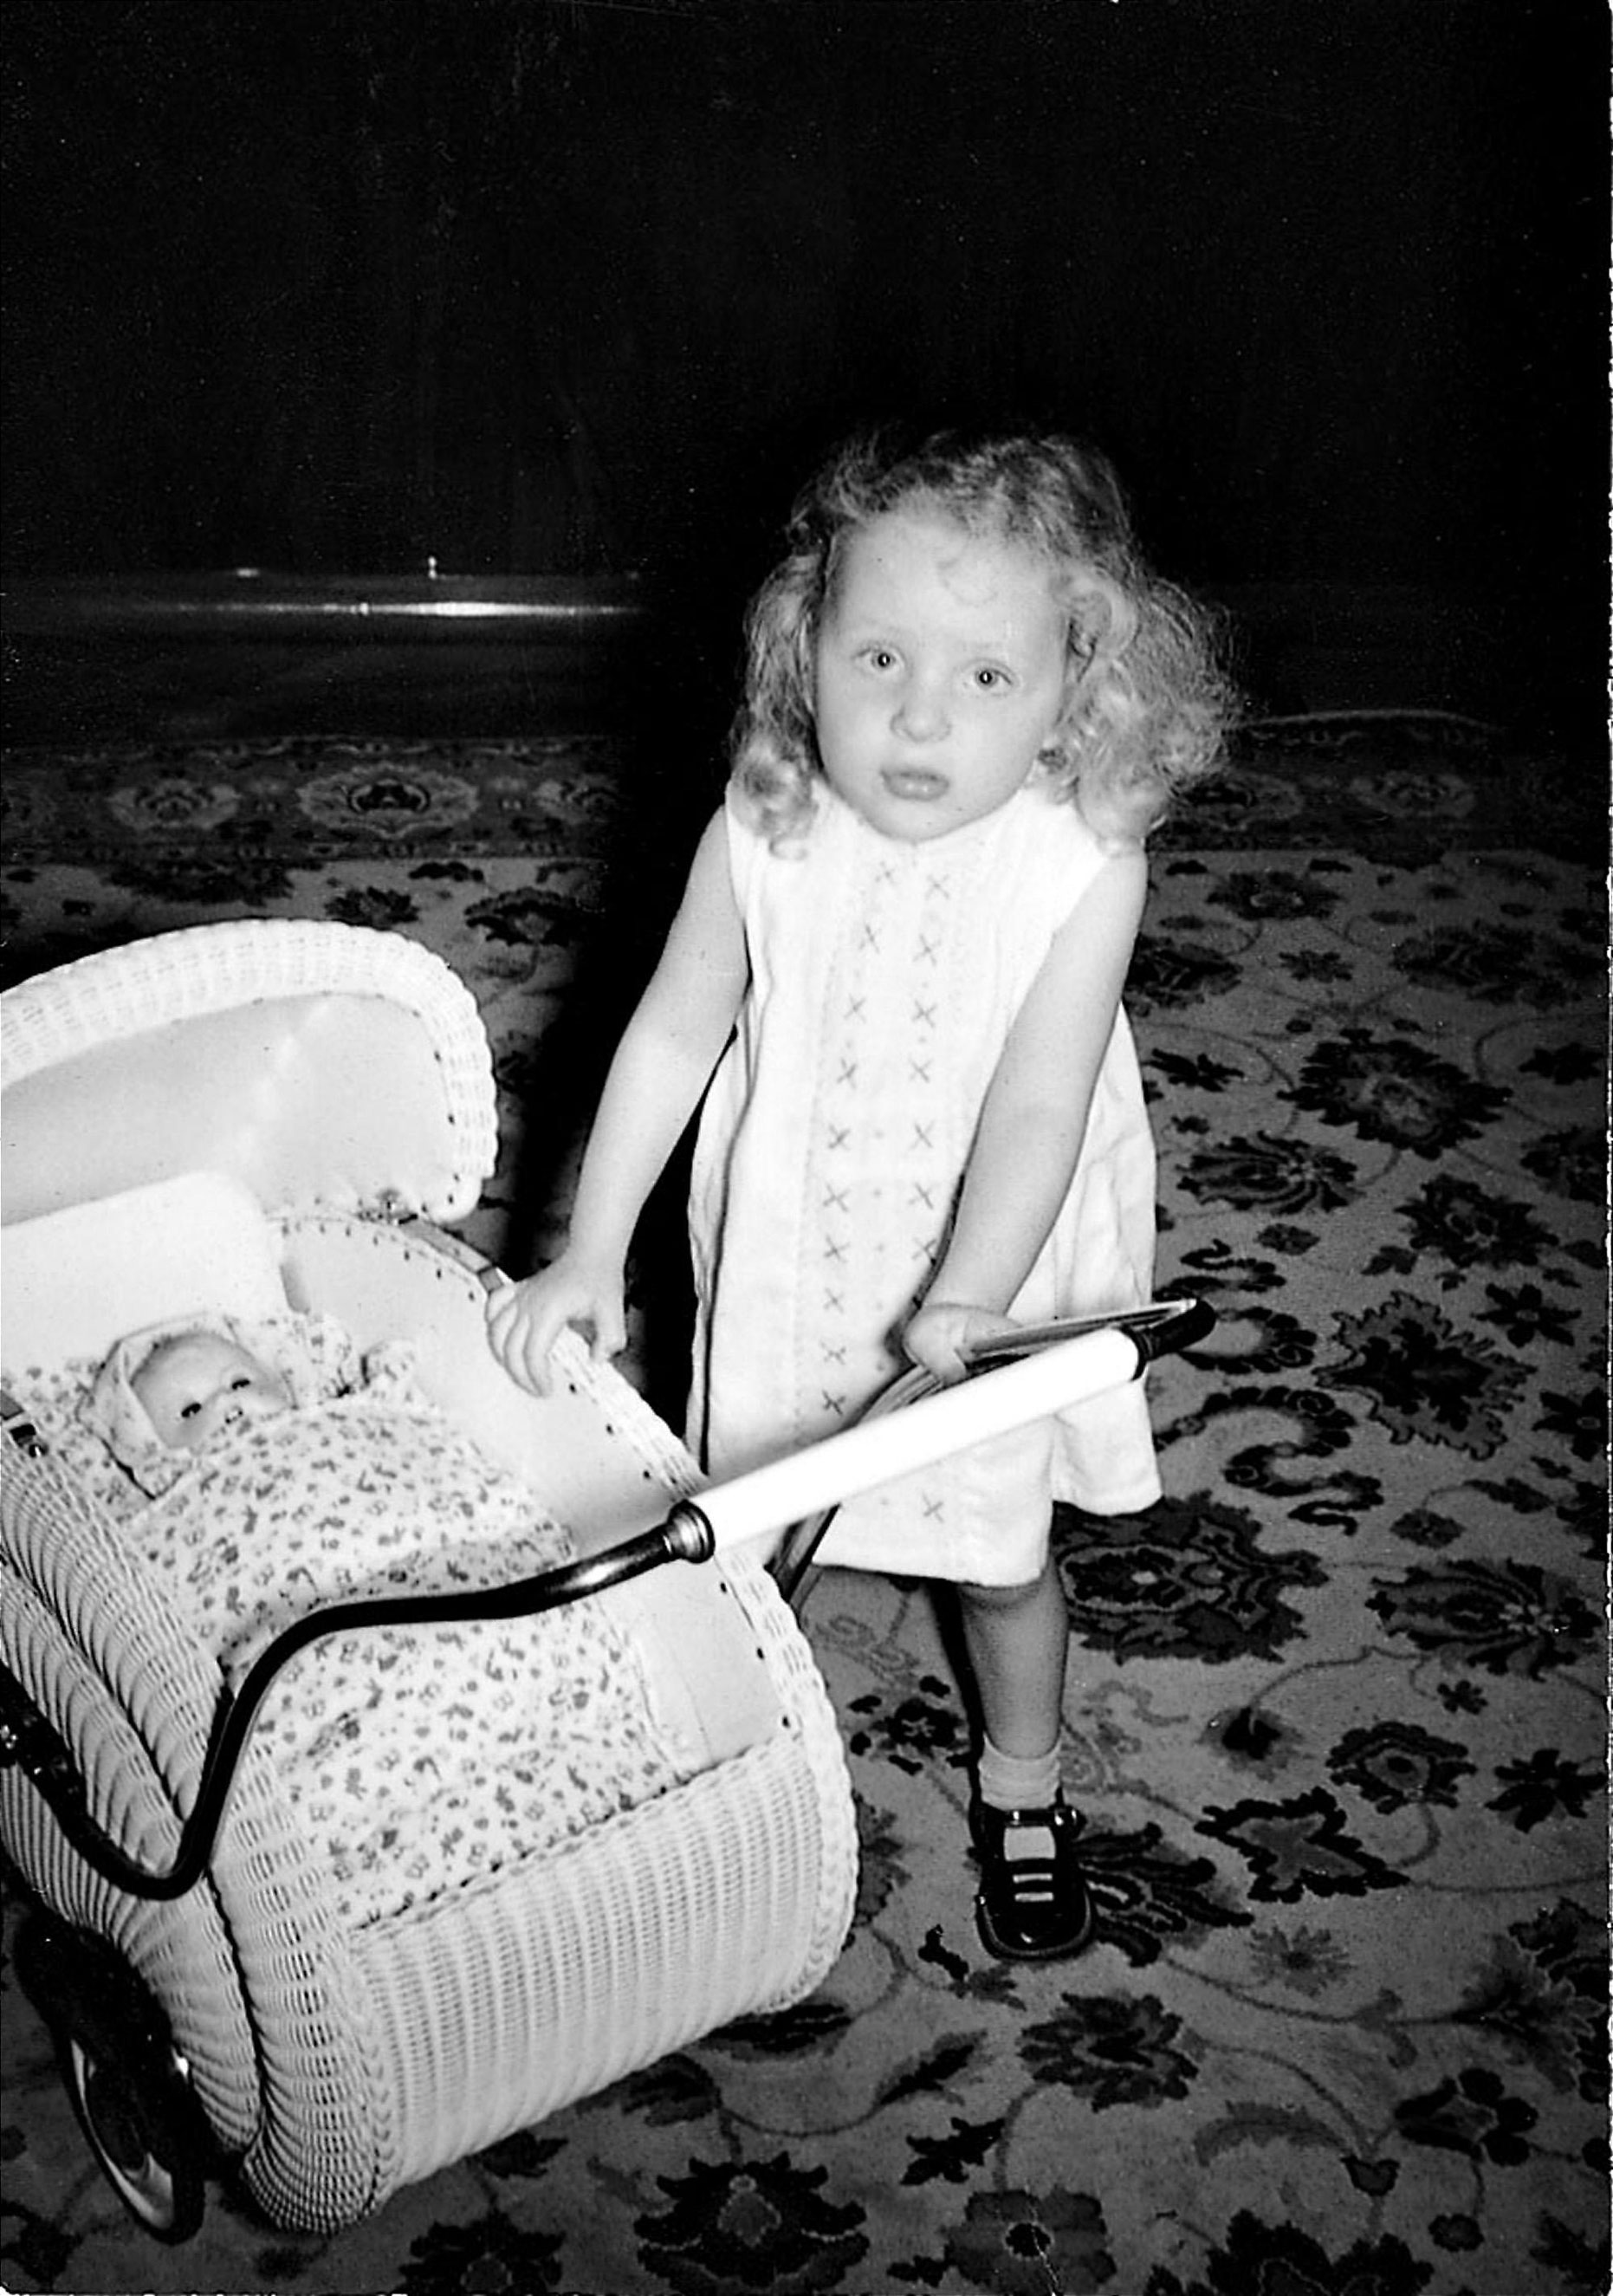 Merkel, then Angela Kasner, as a child with a toy stroller.